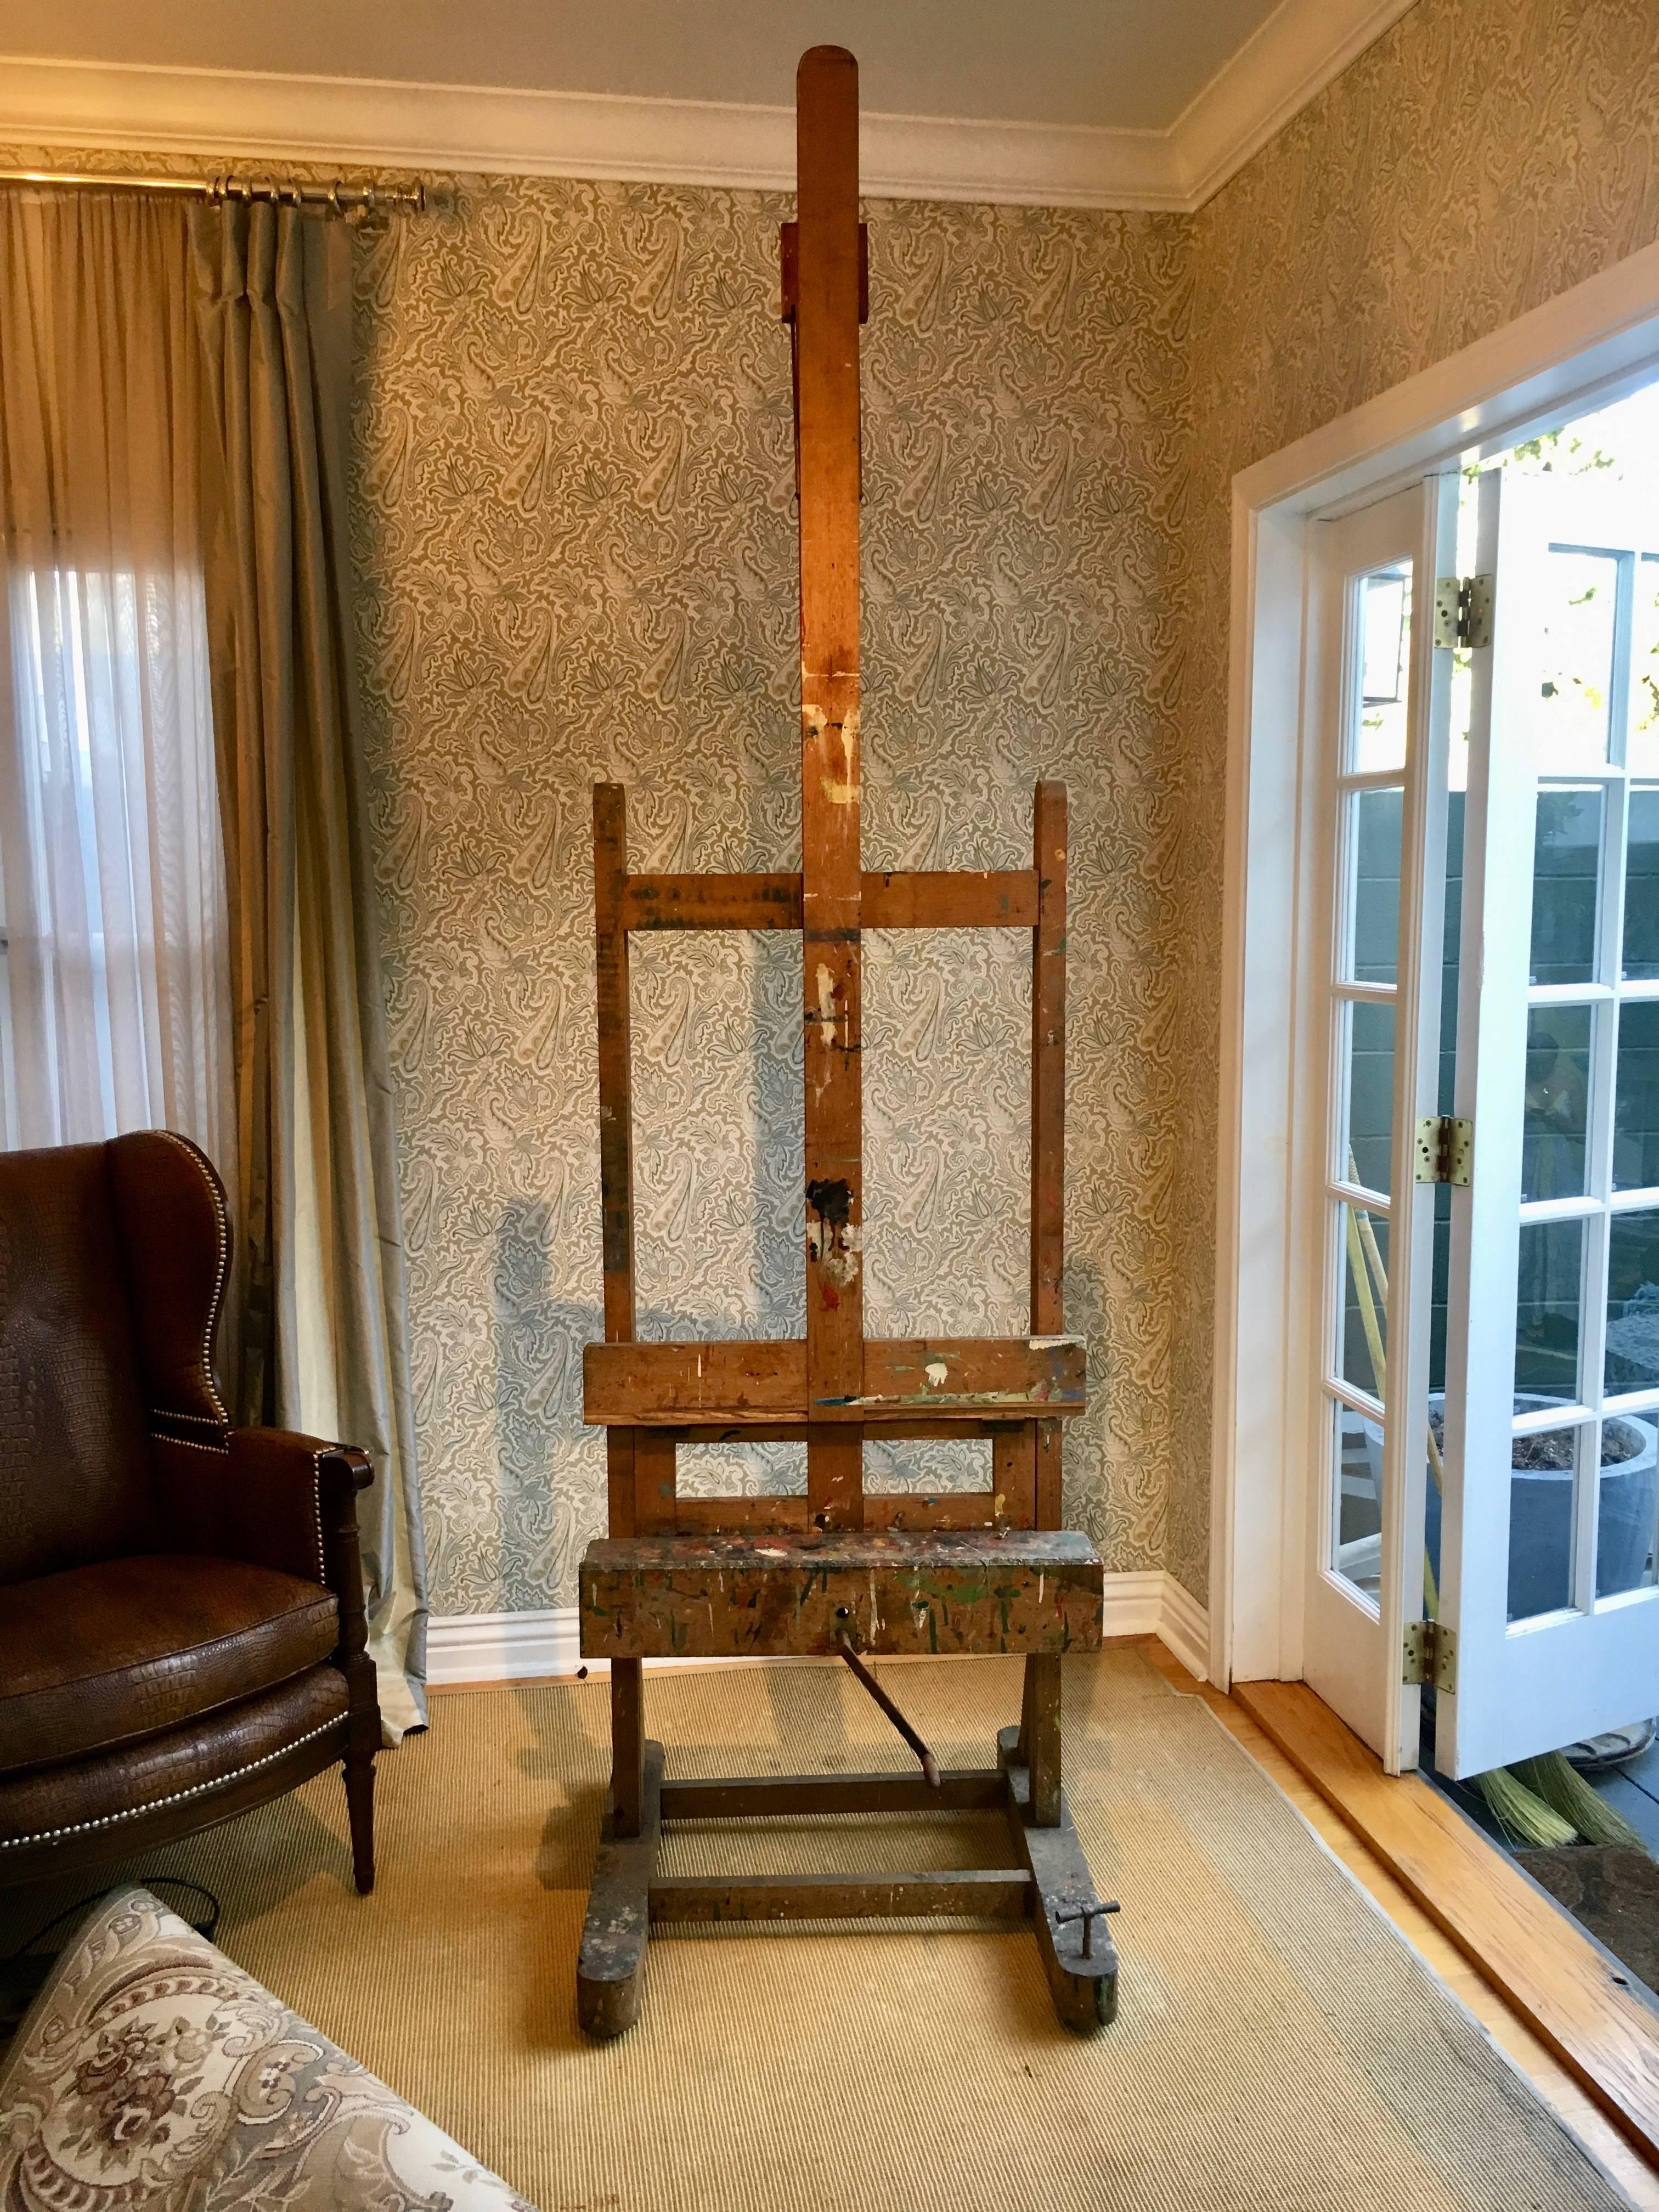 Vintage 19th Century French Wood Artists Easel - Adjustable to over 9' this easel is beautifull patinated with years of age and paint... 
The easel is a great compliment to any room with Character, will hold your canvas or art... or television.